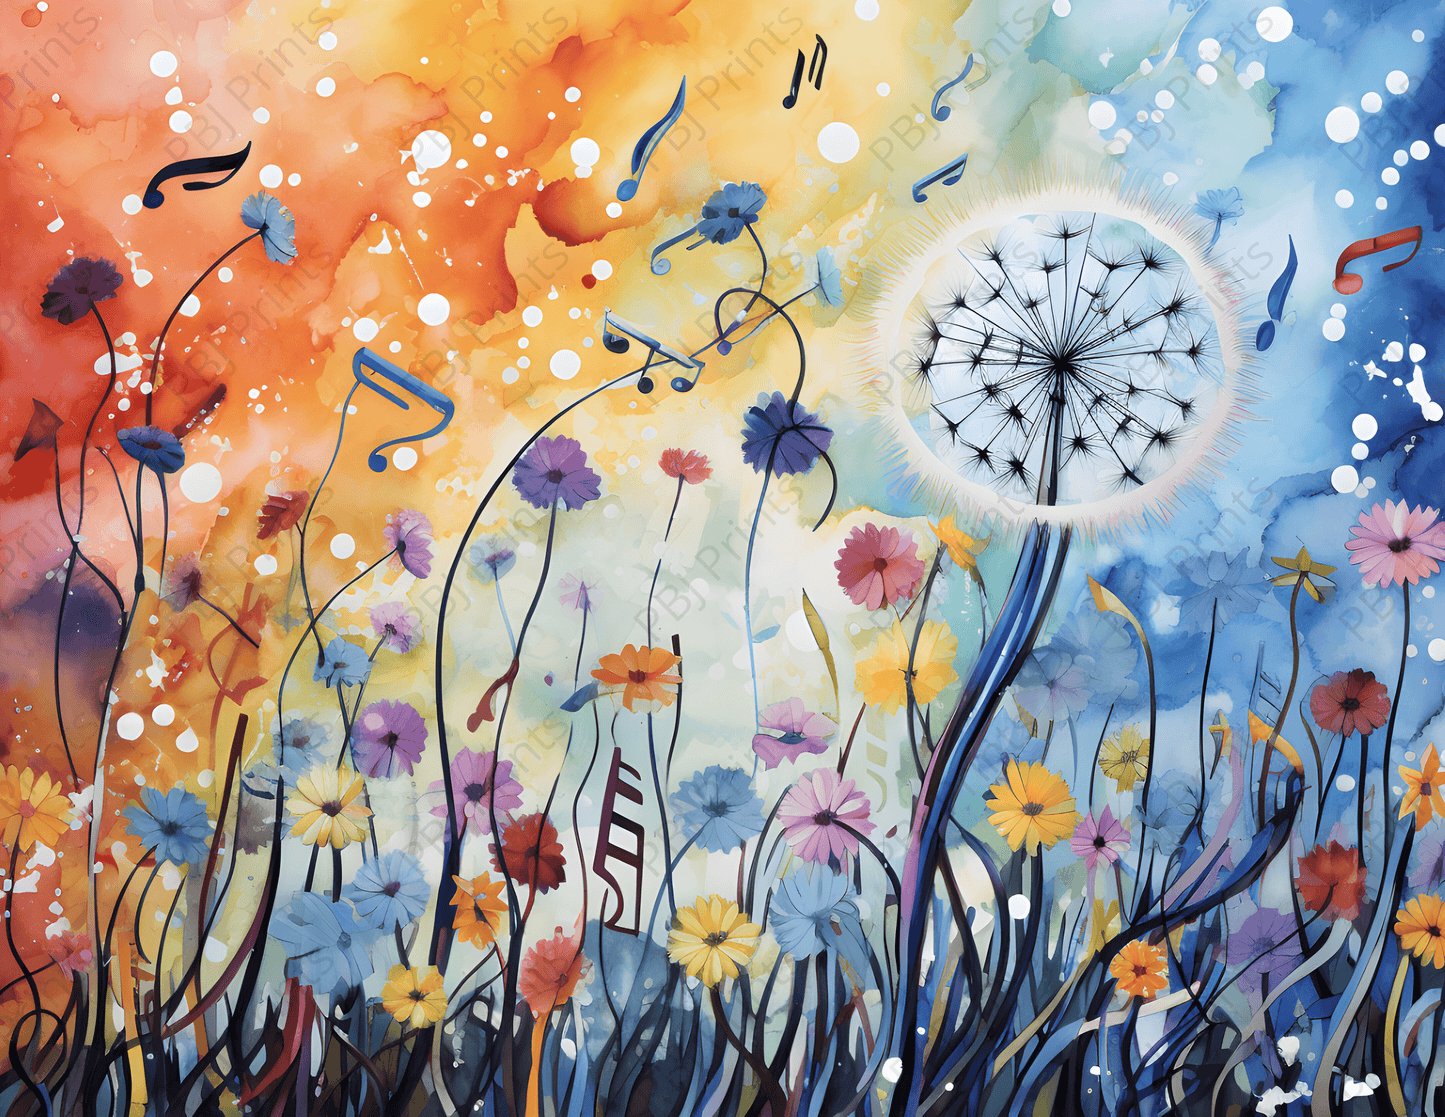 Dandelion & Flowers Emerging - Artist by 2chattychicks teaching eclectic creations - 